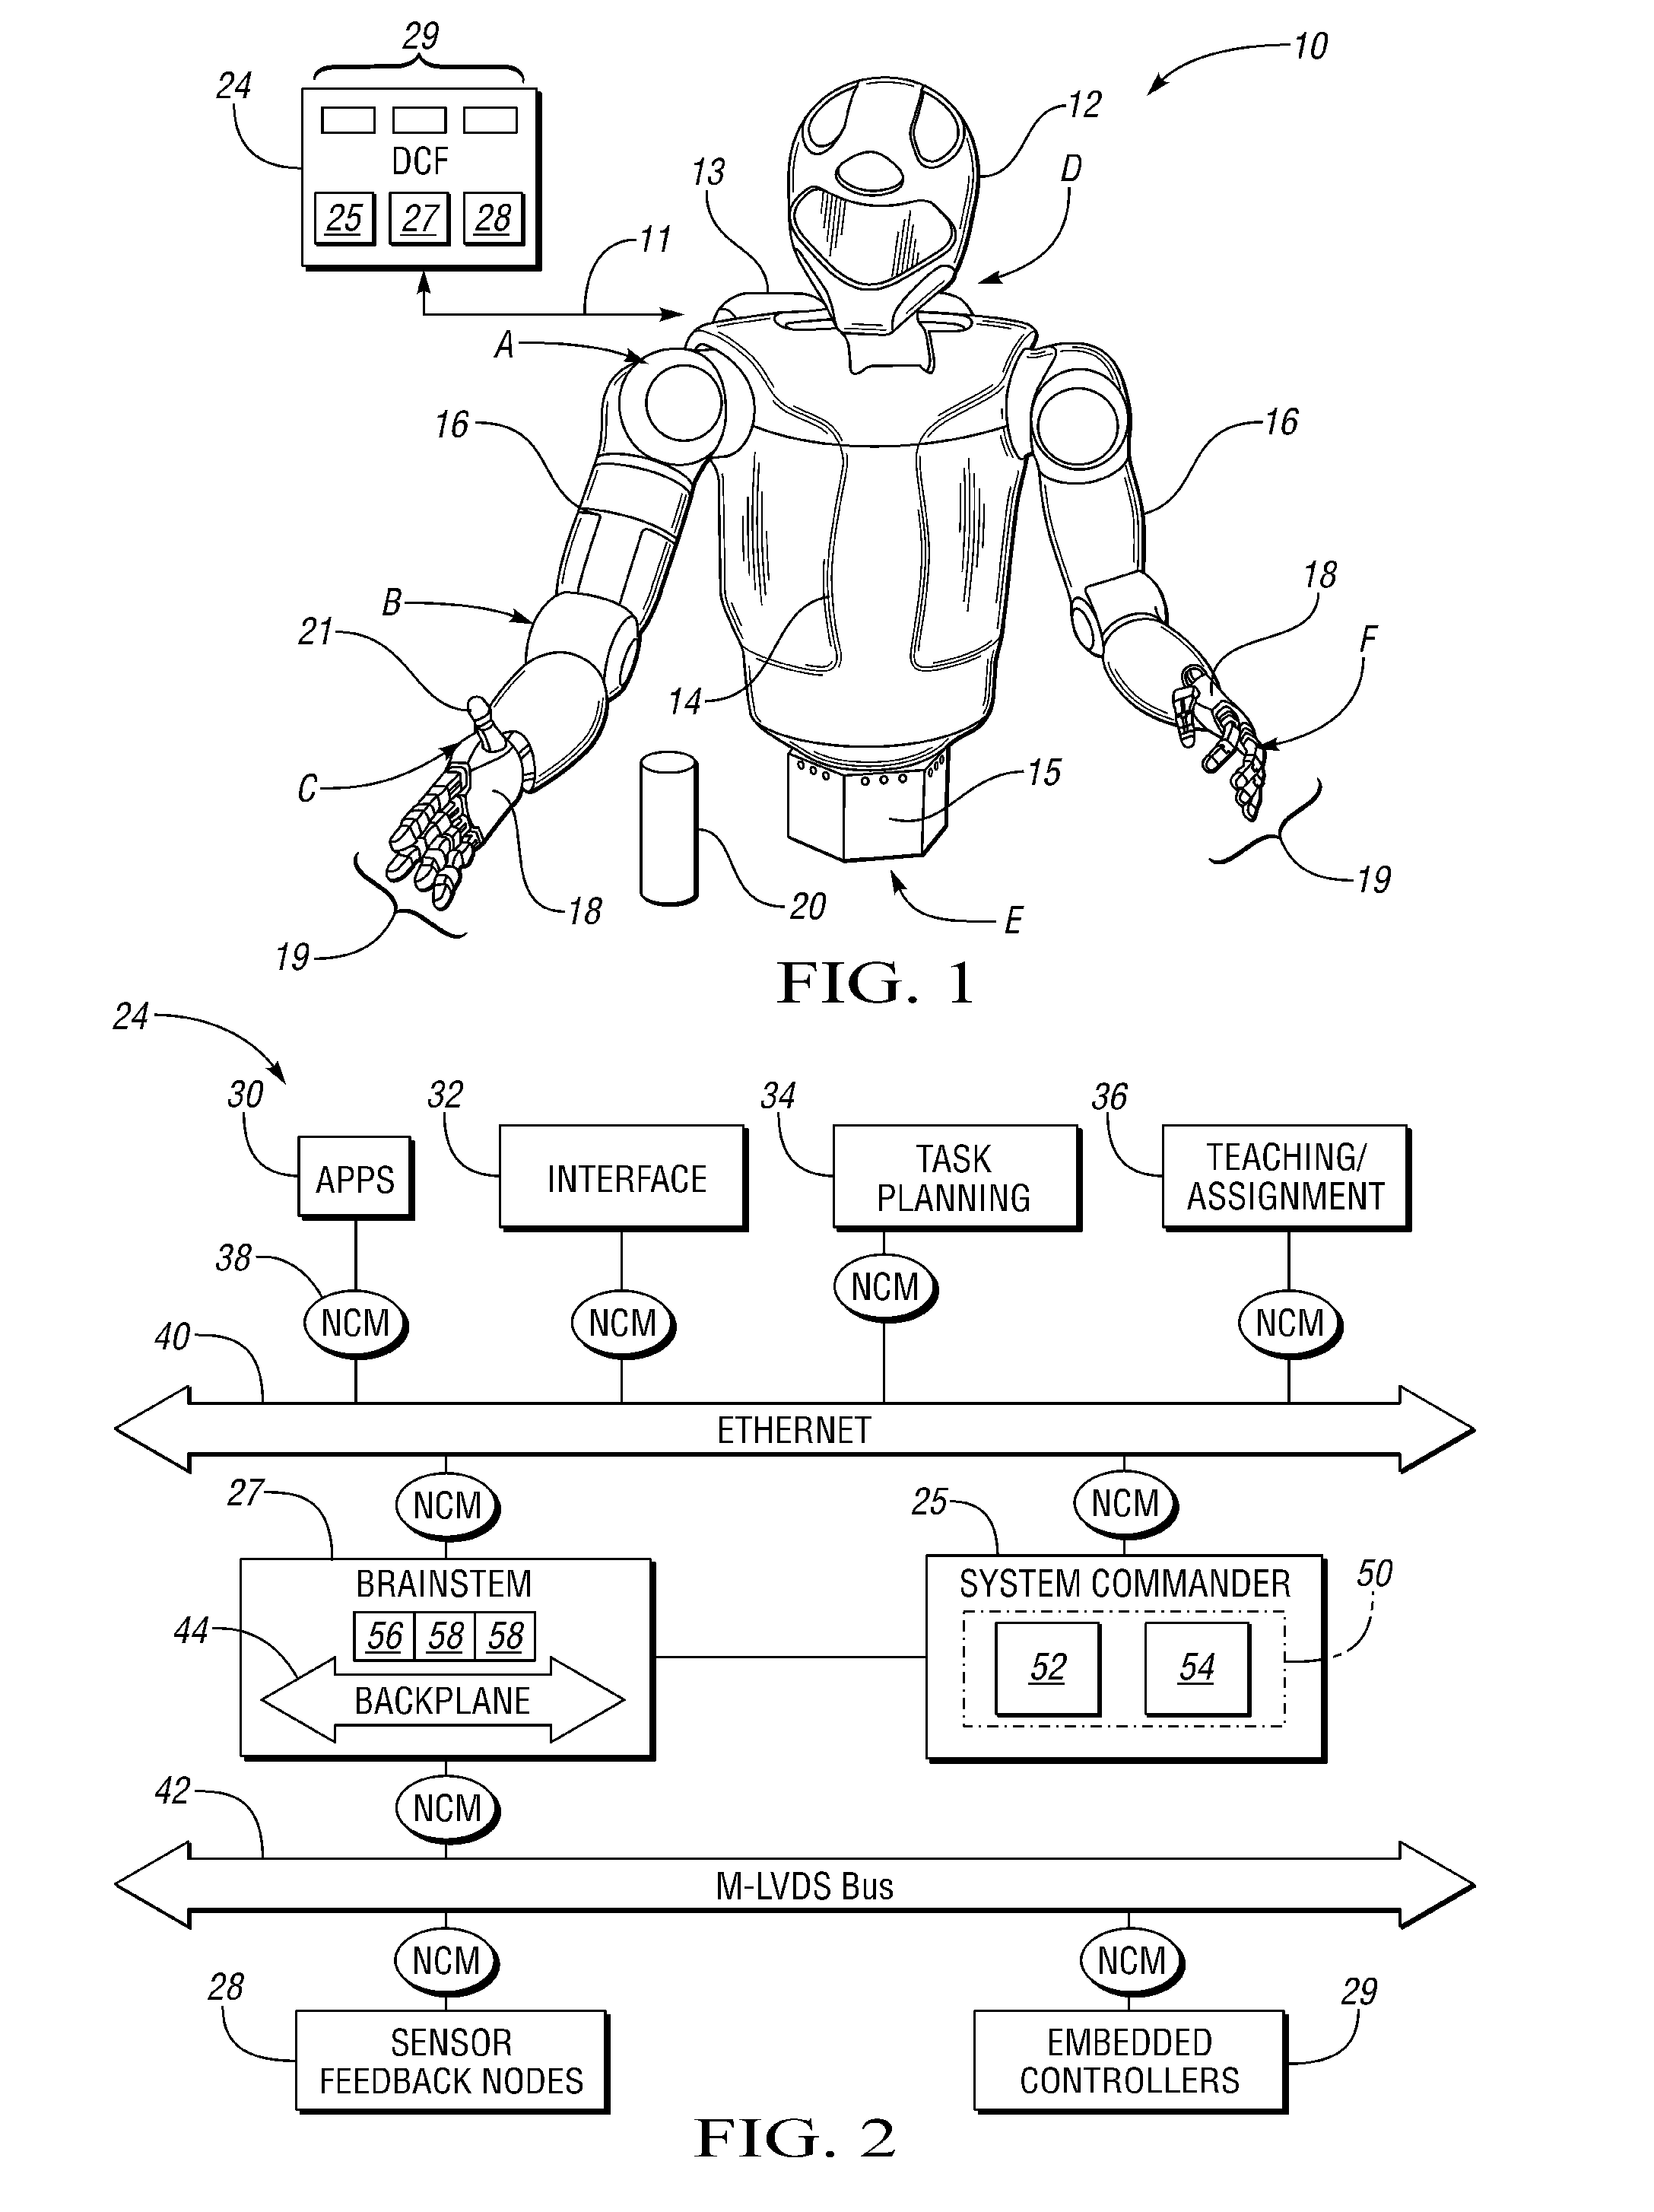 Framework and method for controlling a robotic system using a distributed computer network